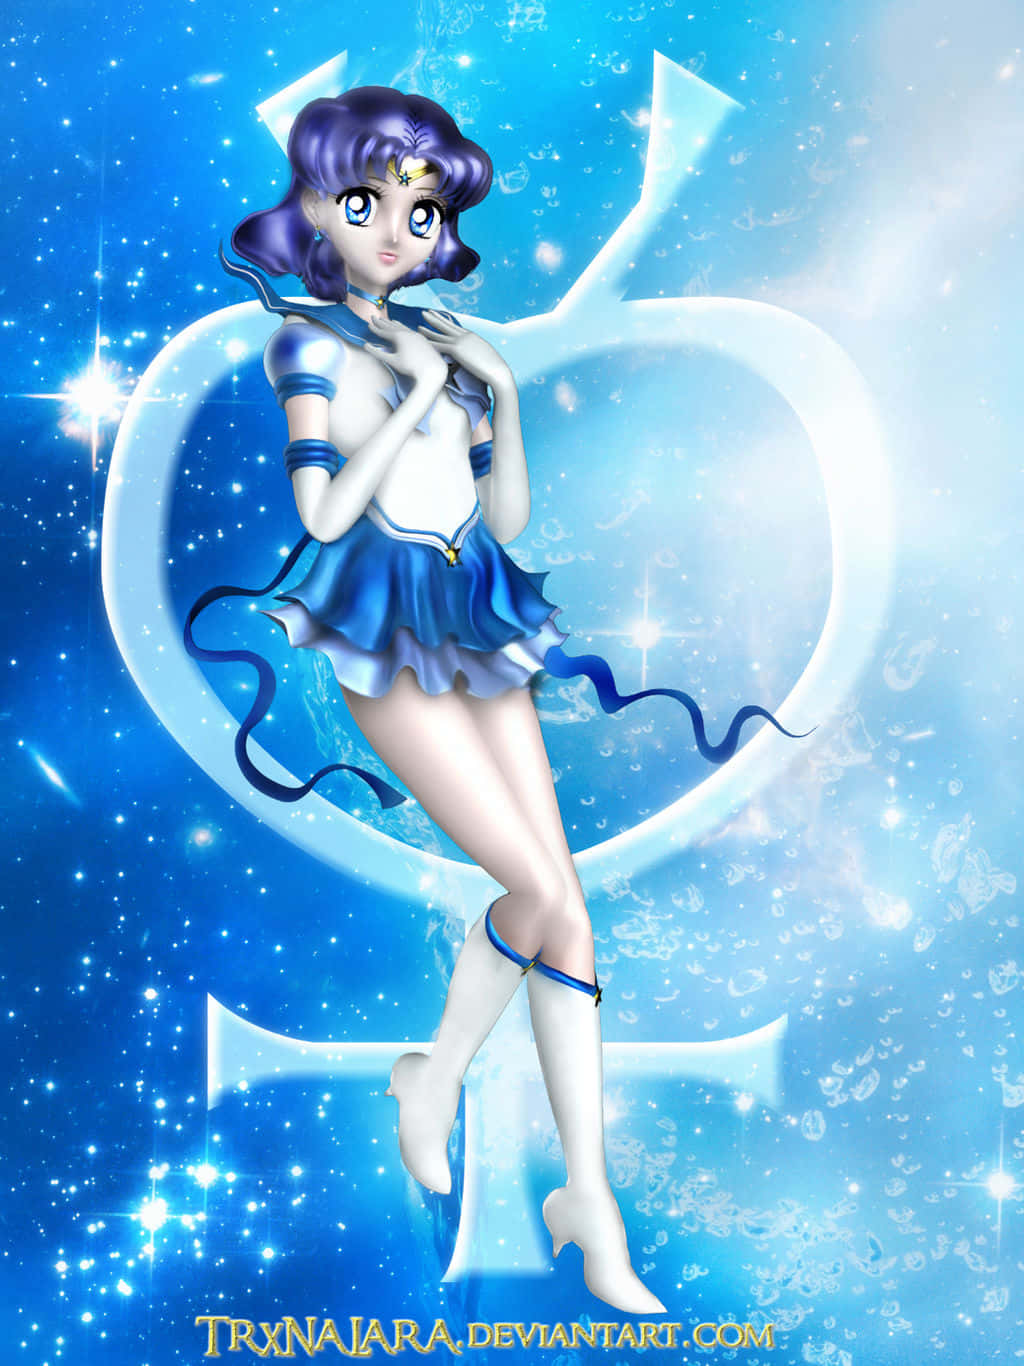 "Sailor Mercury Shows Her Knowledge and Strength" Wallpaper